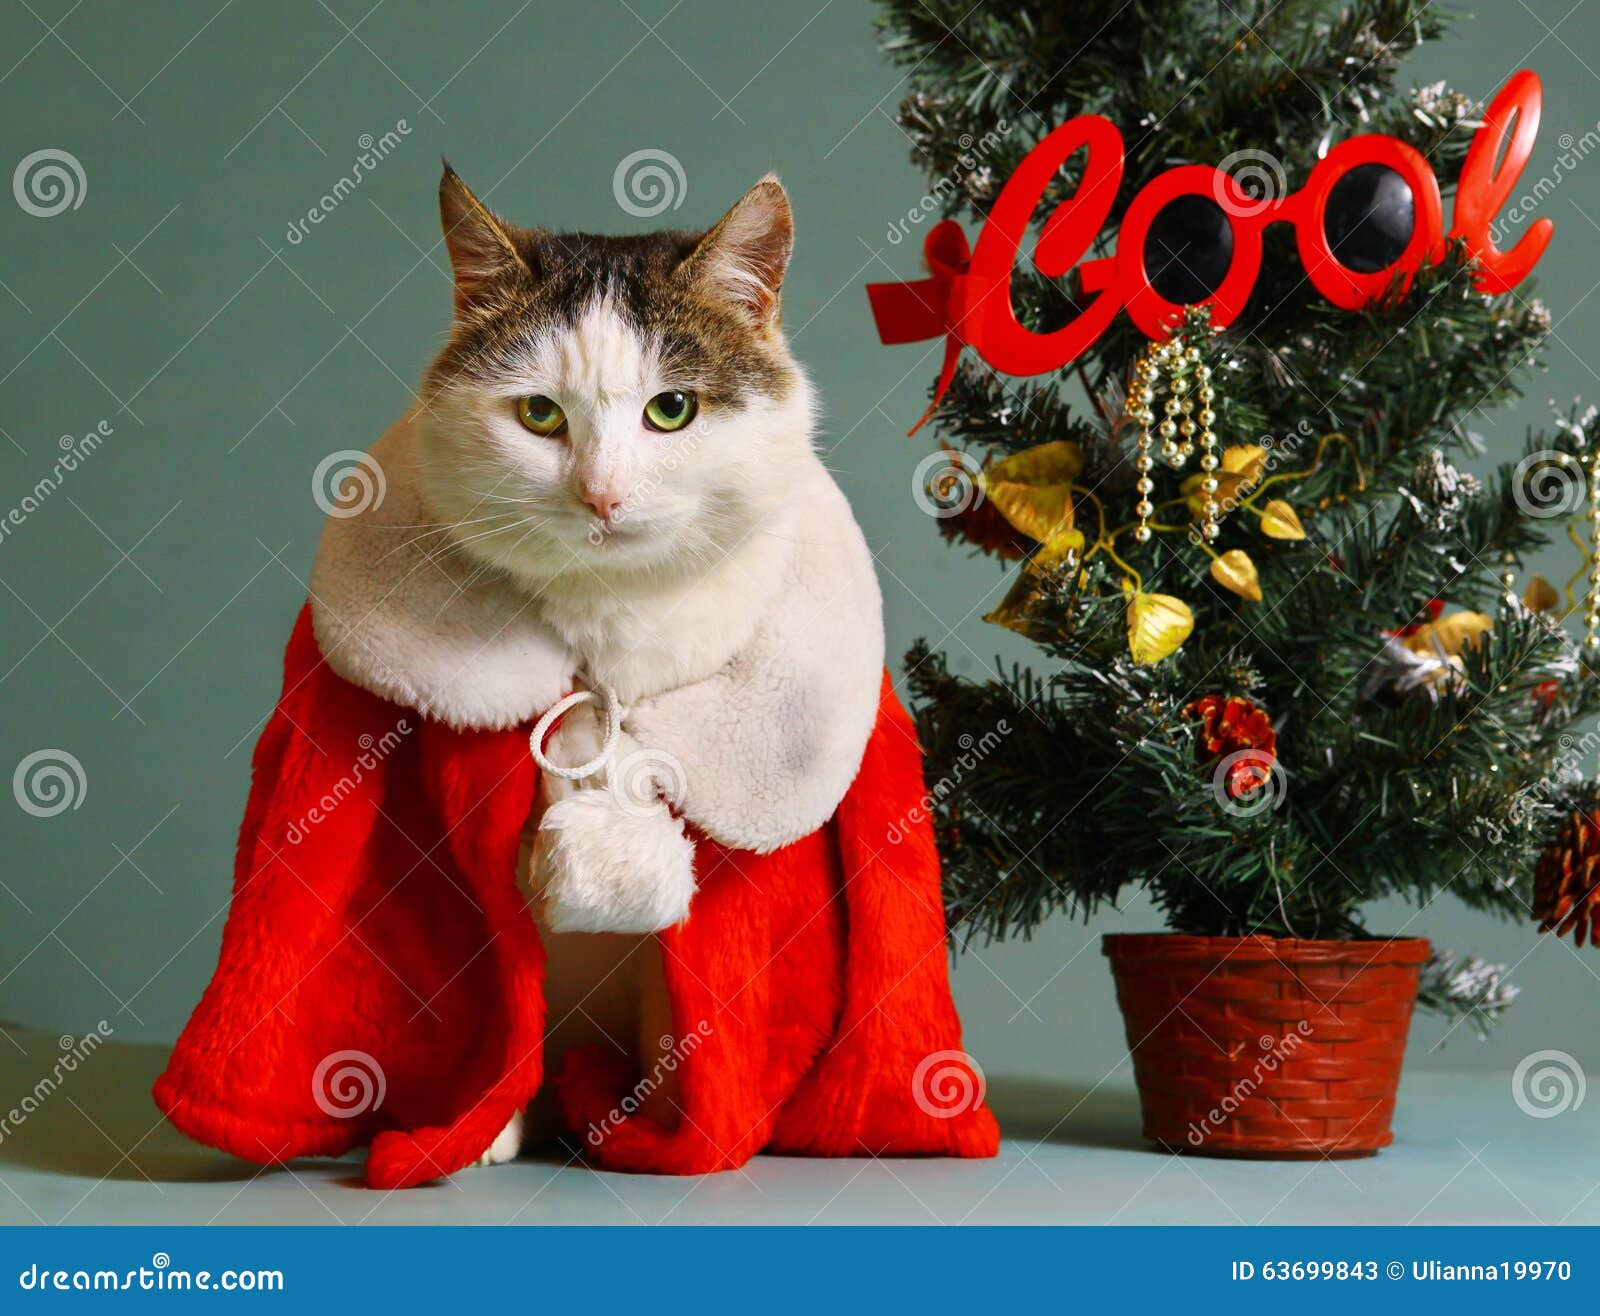 Cool tom cat in santa claus garment mantel with white fur collar sit beside small christmas tree in pot